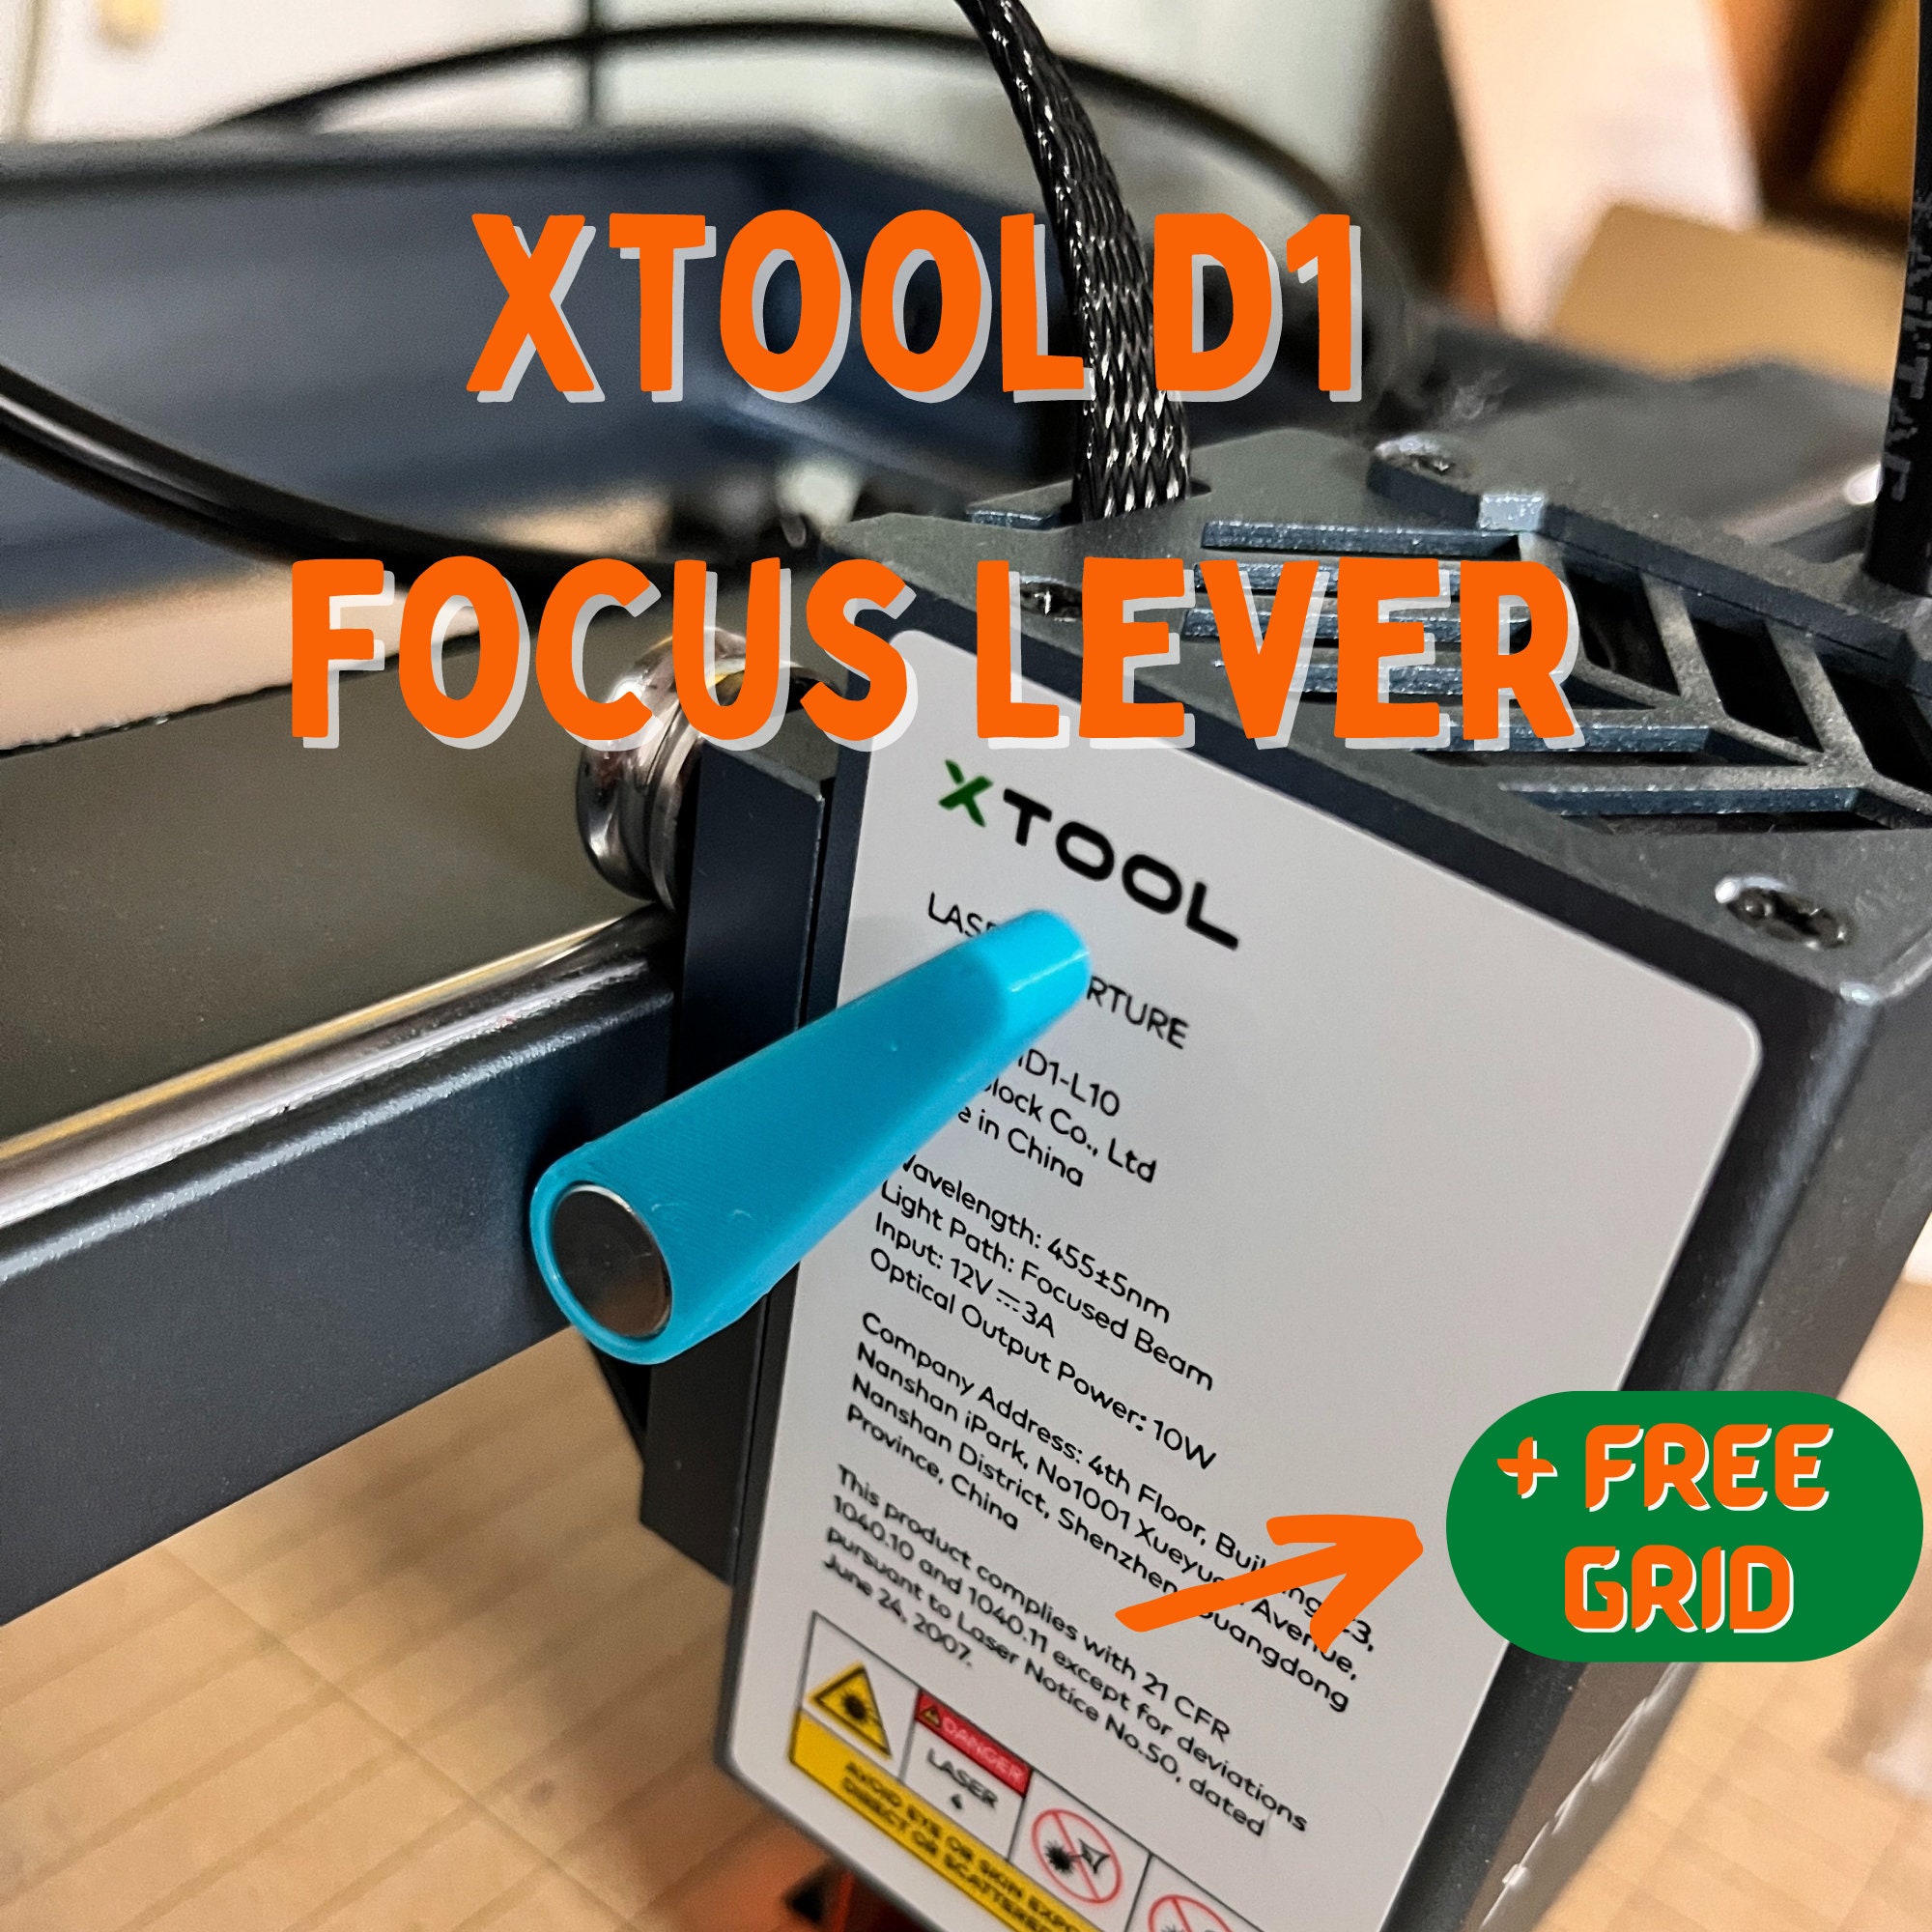 XTool D1 Accessories by PengLord